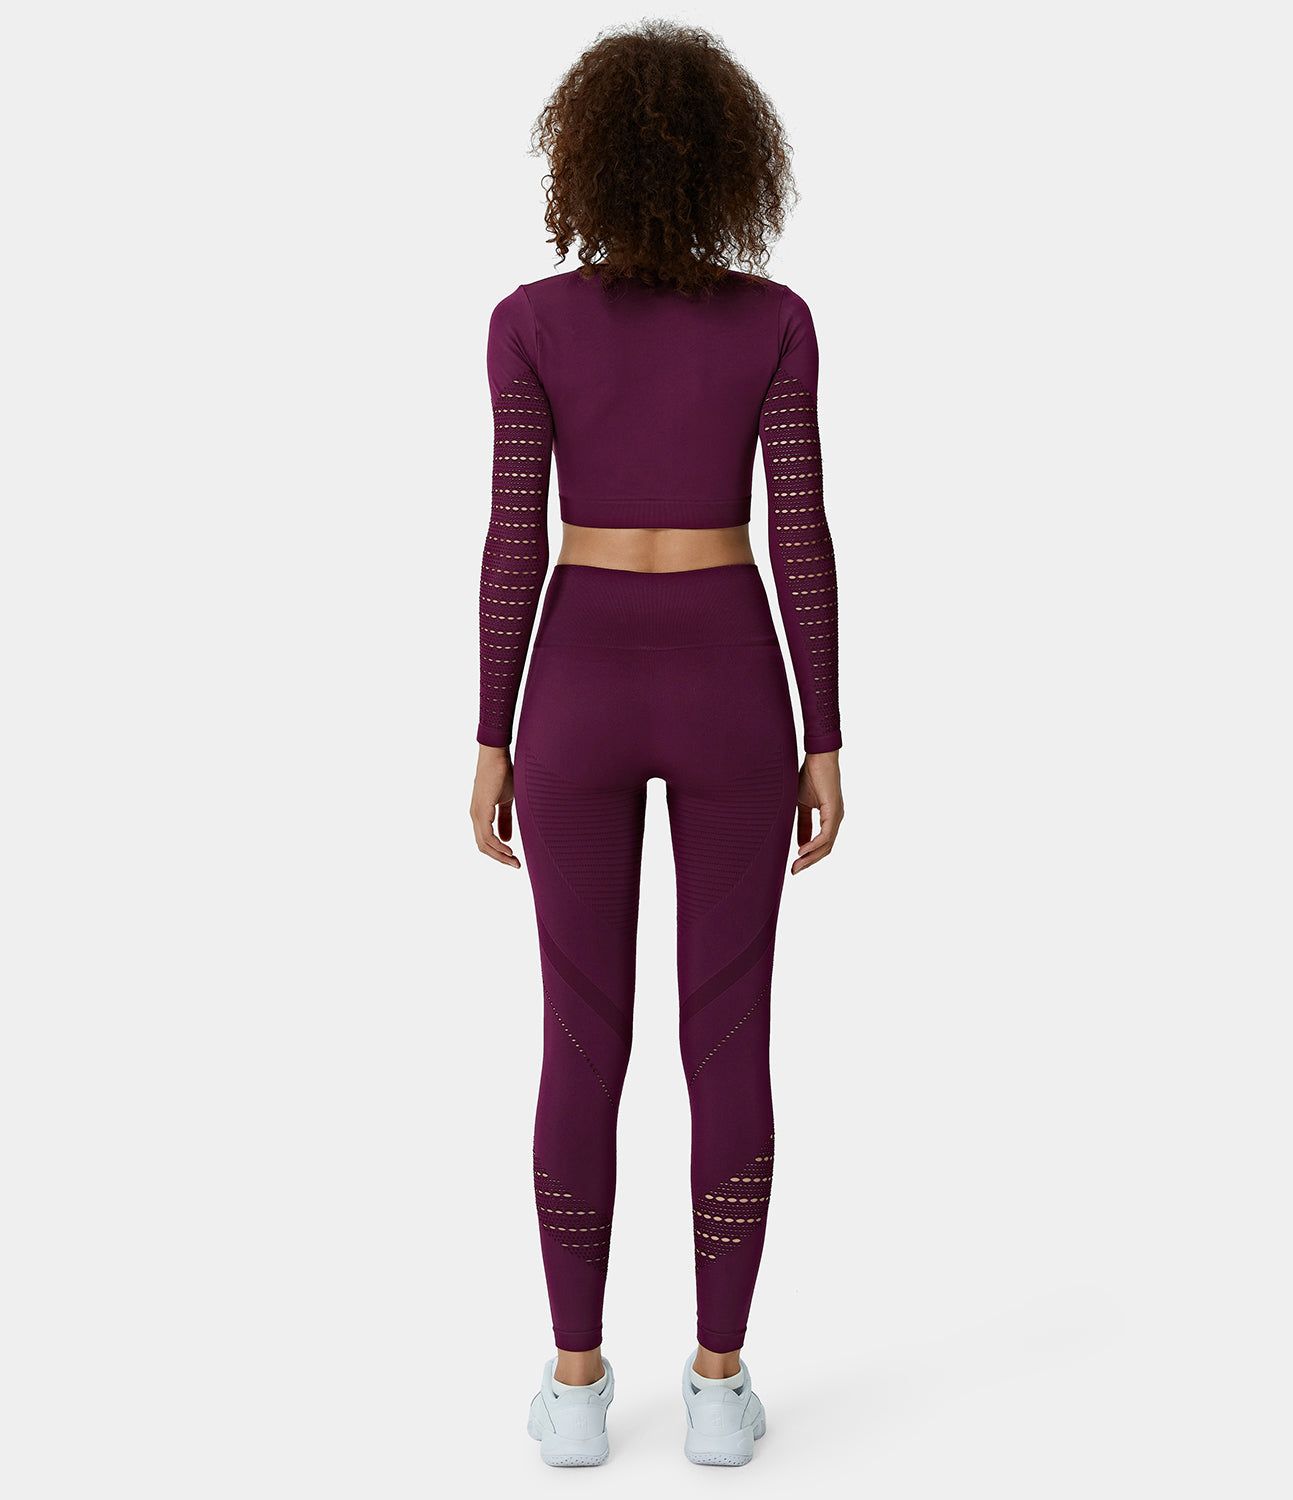 

Halara Cut Out Long Sleeve Sports Top & High Waisted Full Length Leggings Set - Red Violet